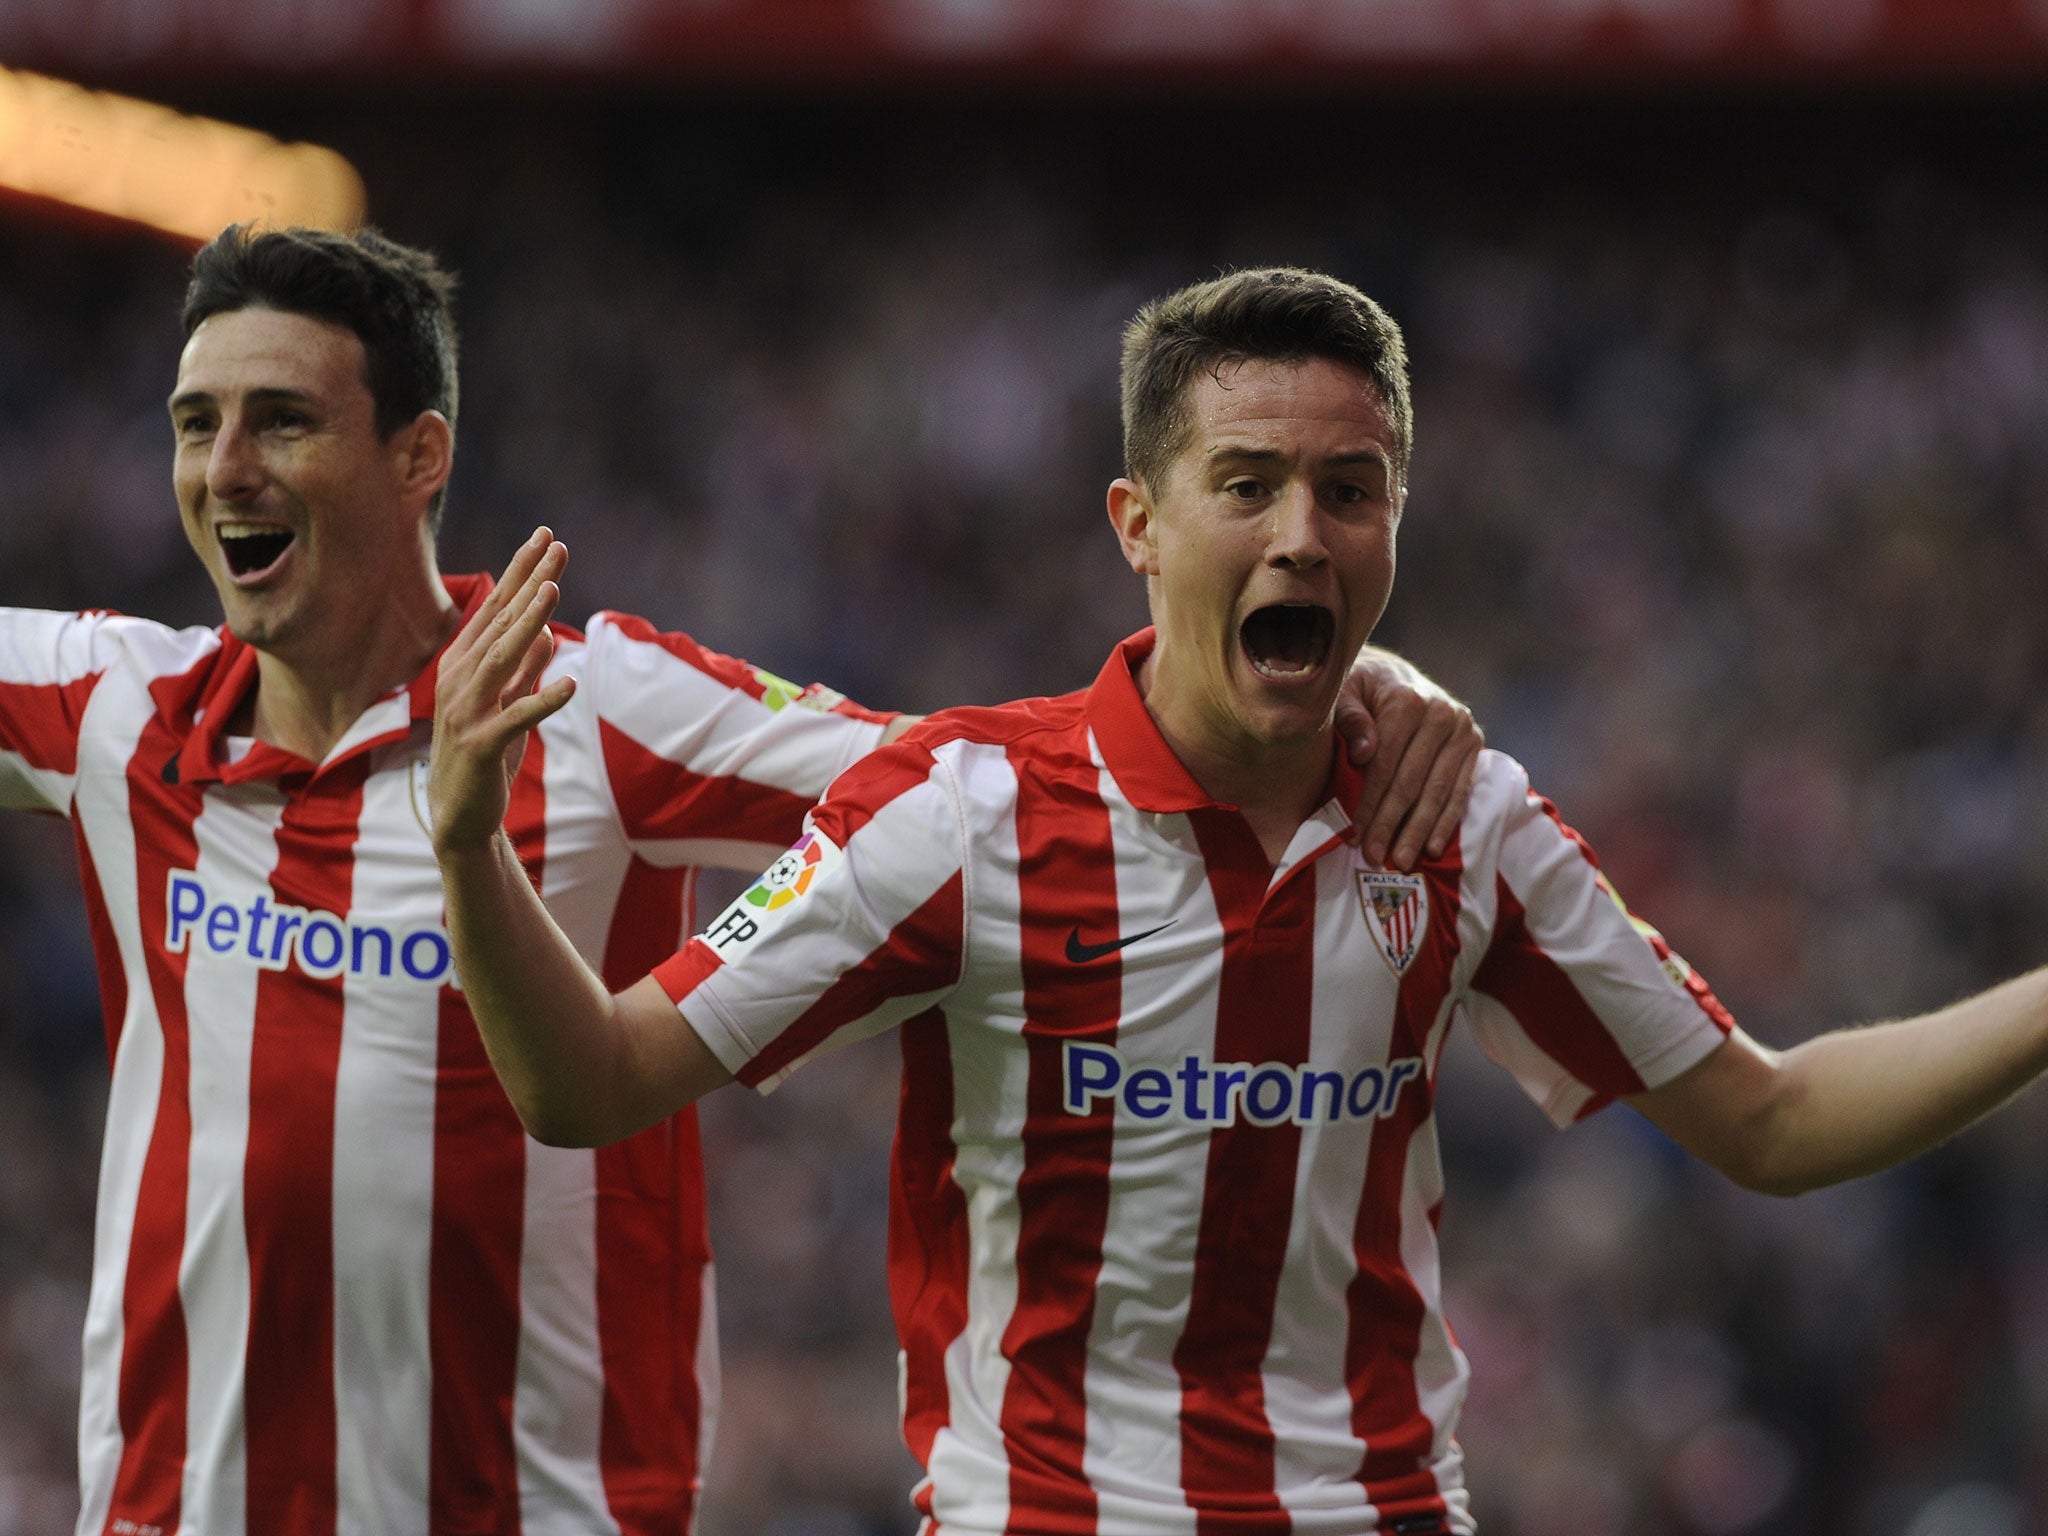 Ander Herrera is close to joining Manchester United, according to multiple reports in Spain